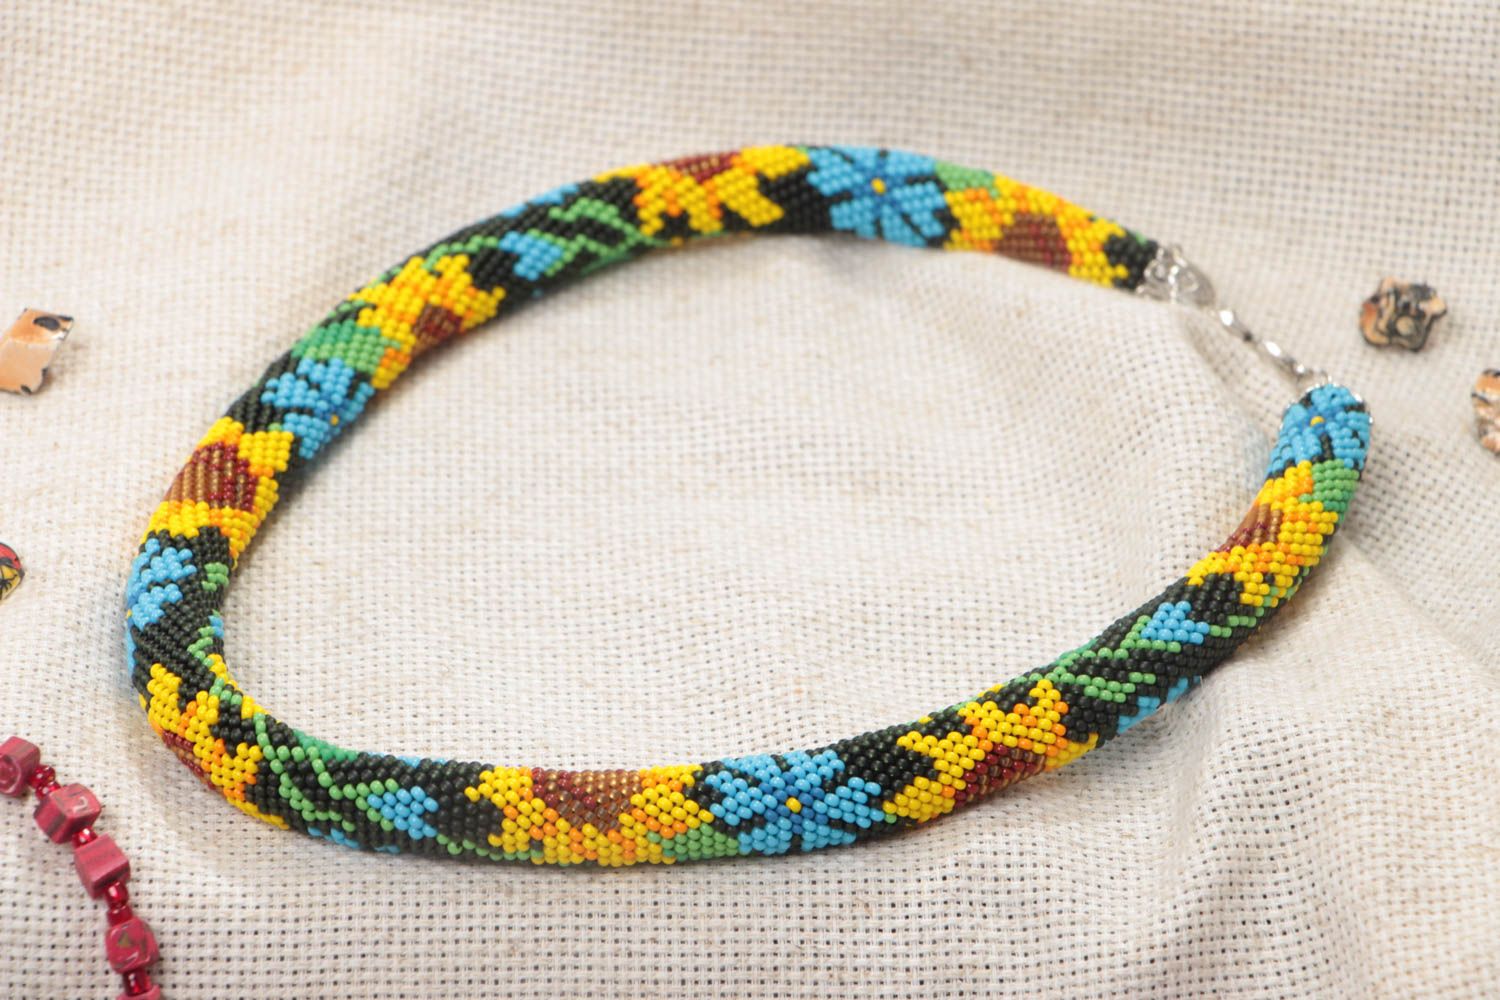 Handmade designer bead woven cord necklace with sunflowers on black background photo 1